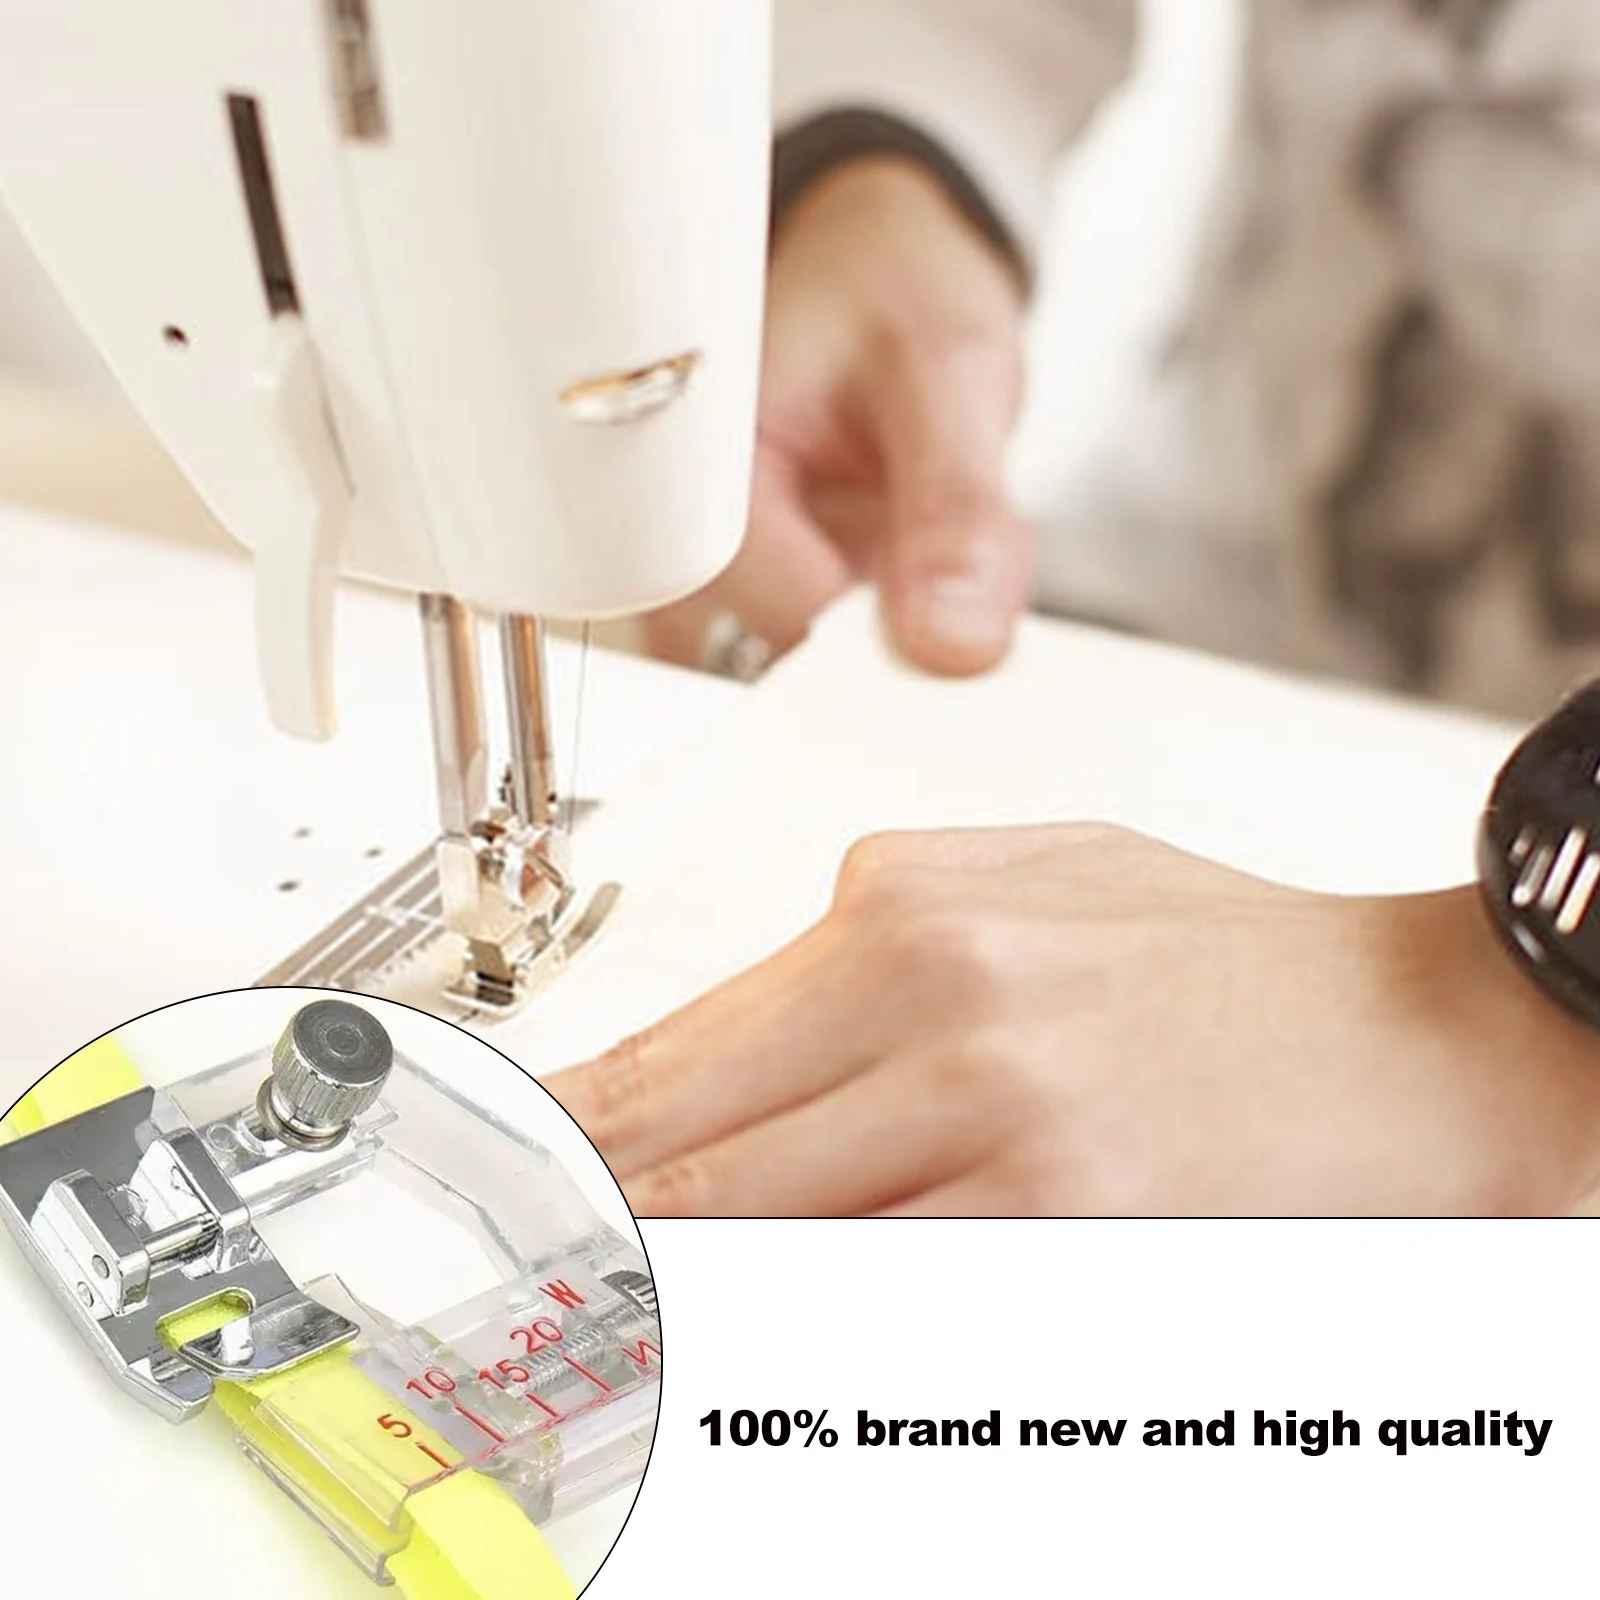 Adjustable Bias Binder Foot Sewing Machine Presser Foot Snap-on-Compatible  Fits All Low Shank Snap-On Singer, Brother and More!The Adjustable Range is